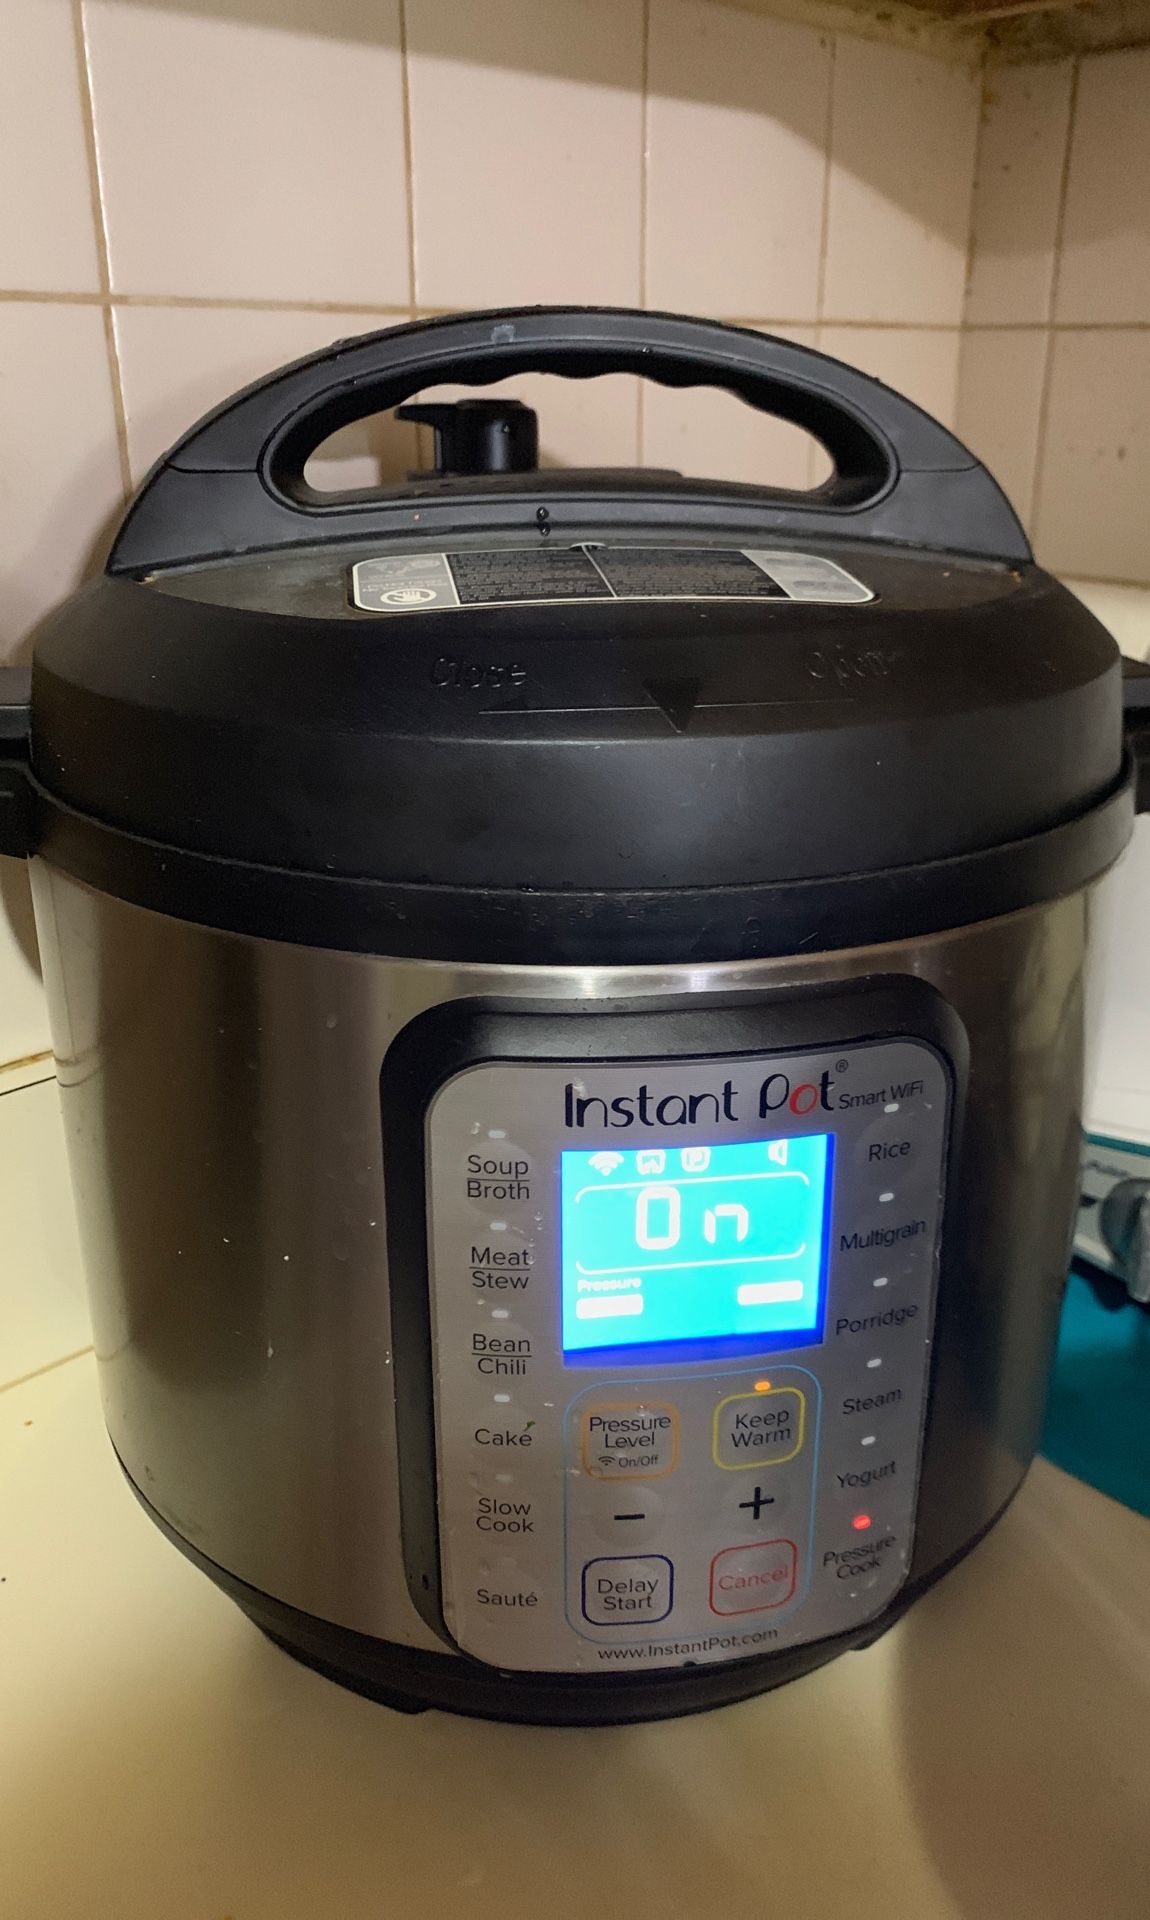 Two months used instant pot smart can connect to WiFi